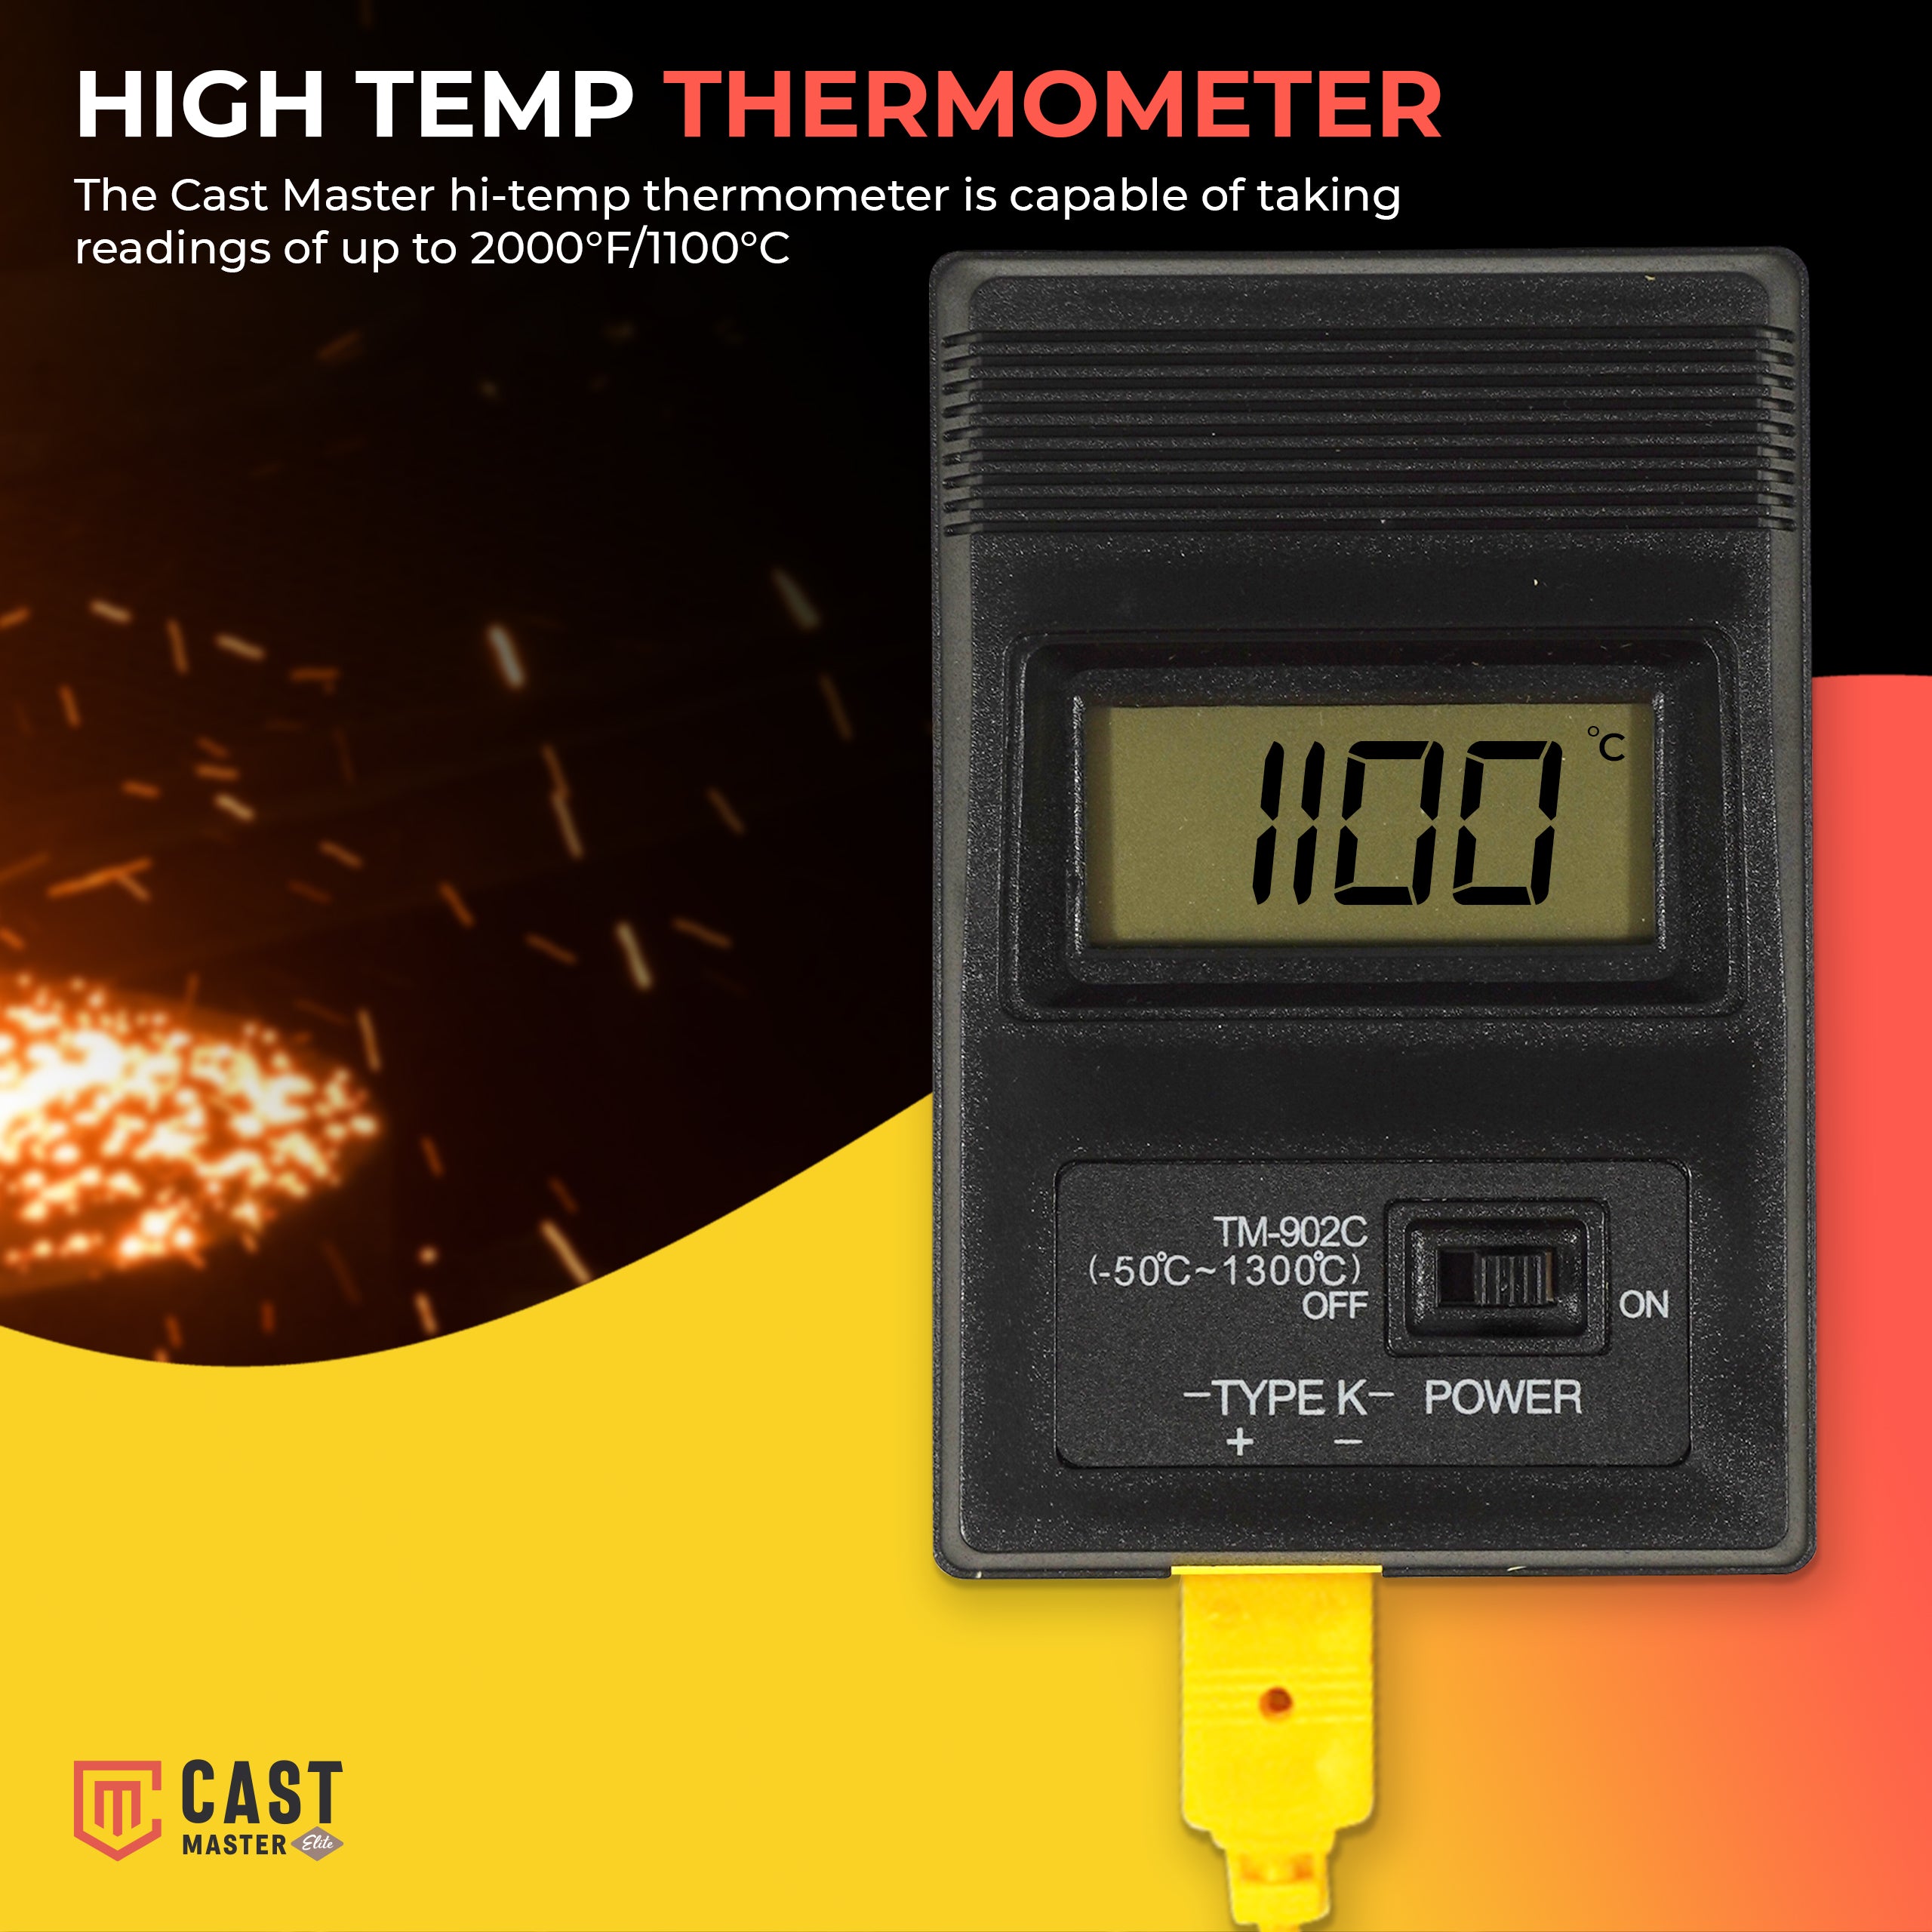 HIM Gaertner - Thermometer- high quality thermometer for